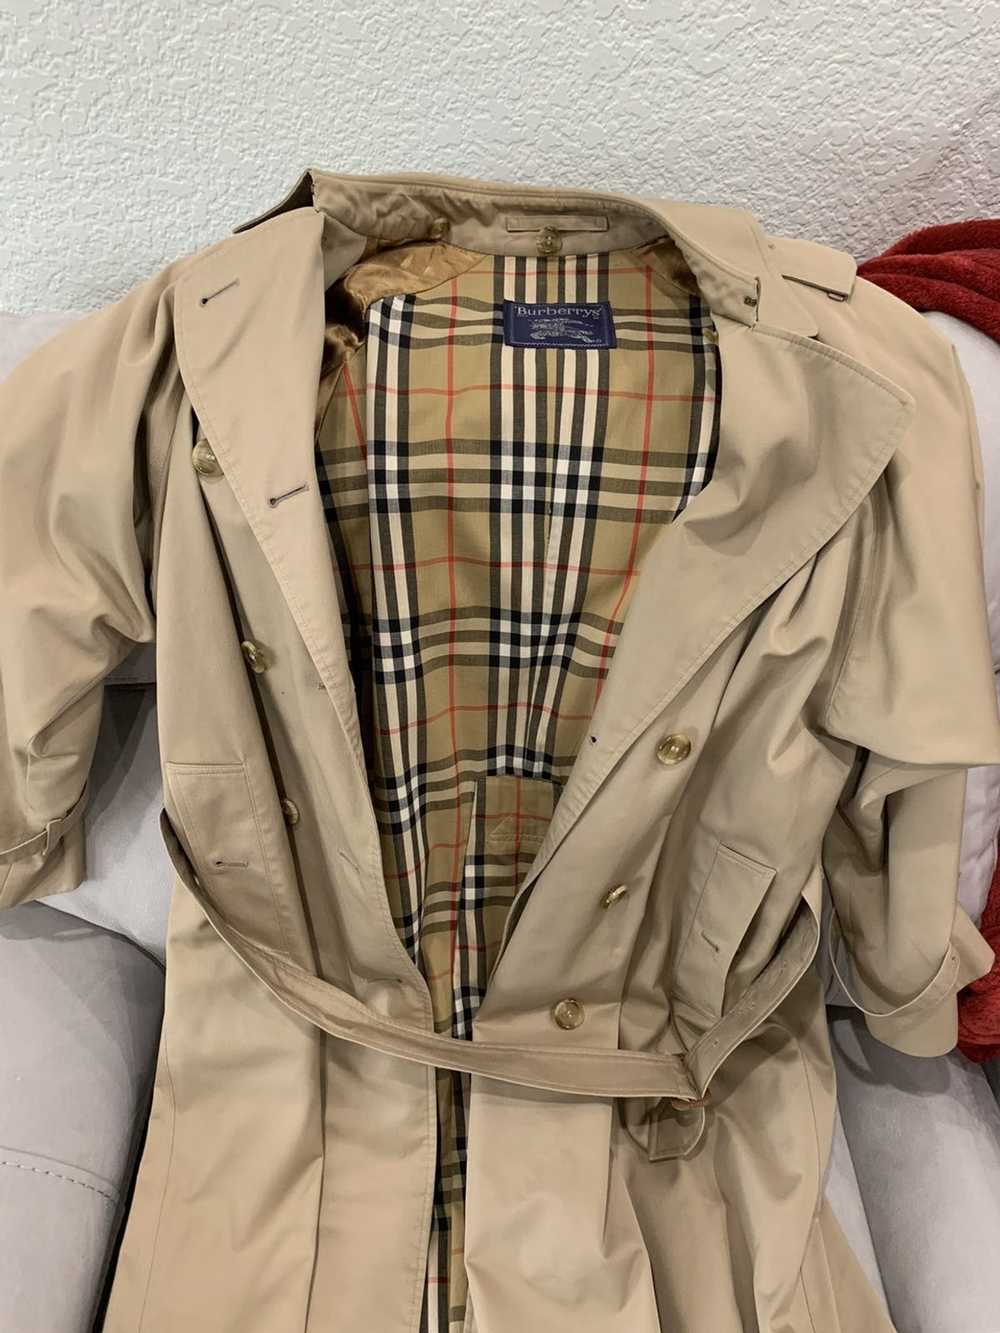 Burberry Burberry Trench Coat - image 4